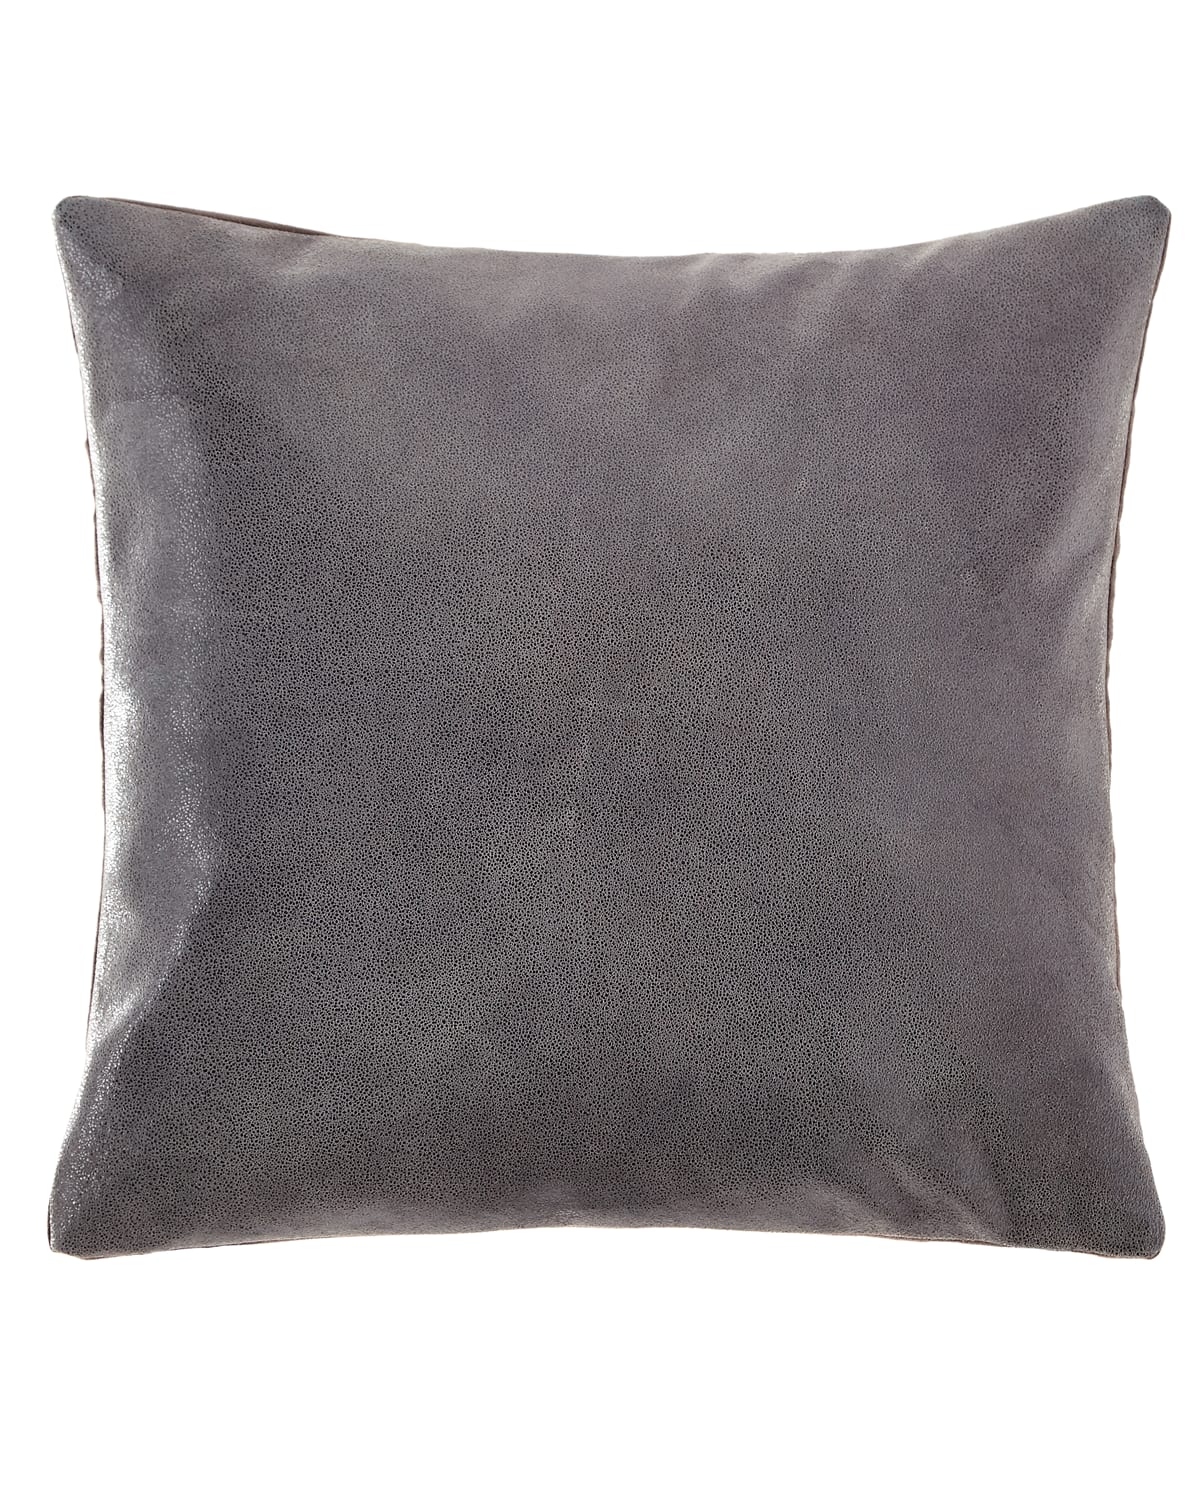 Image Donna Karan Home Clear Lacque Printed Leather Decorative Pillow